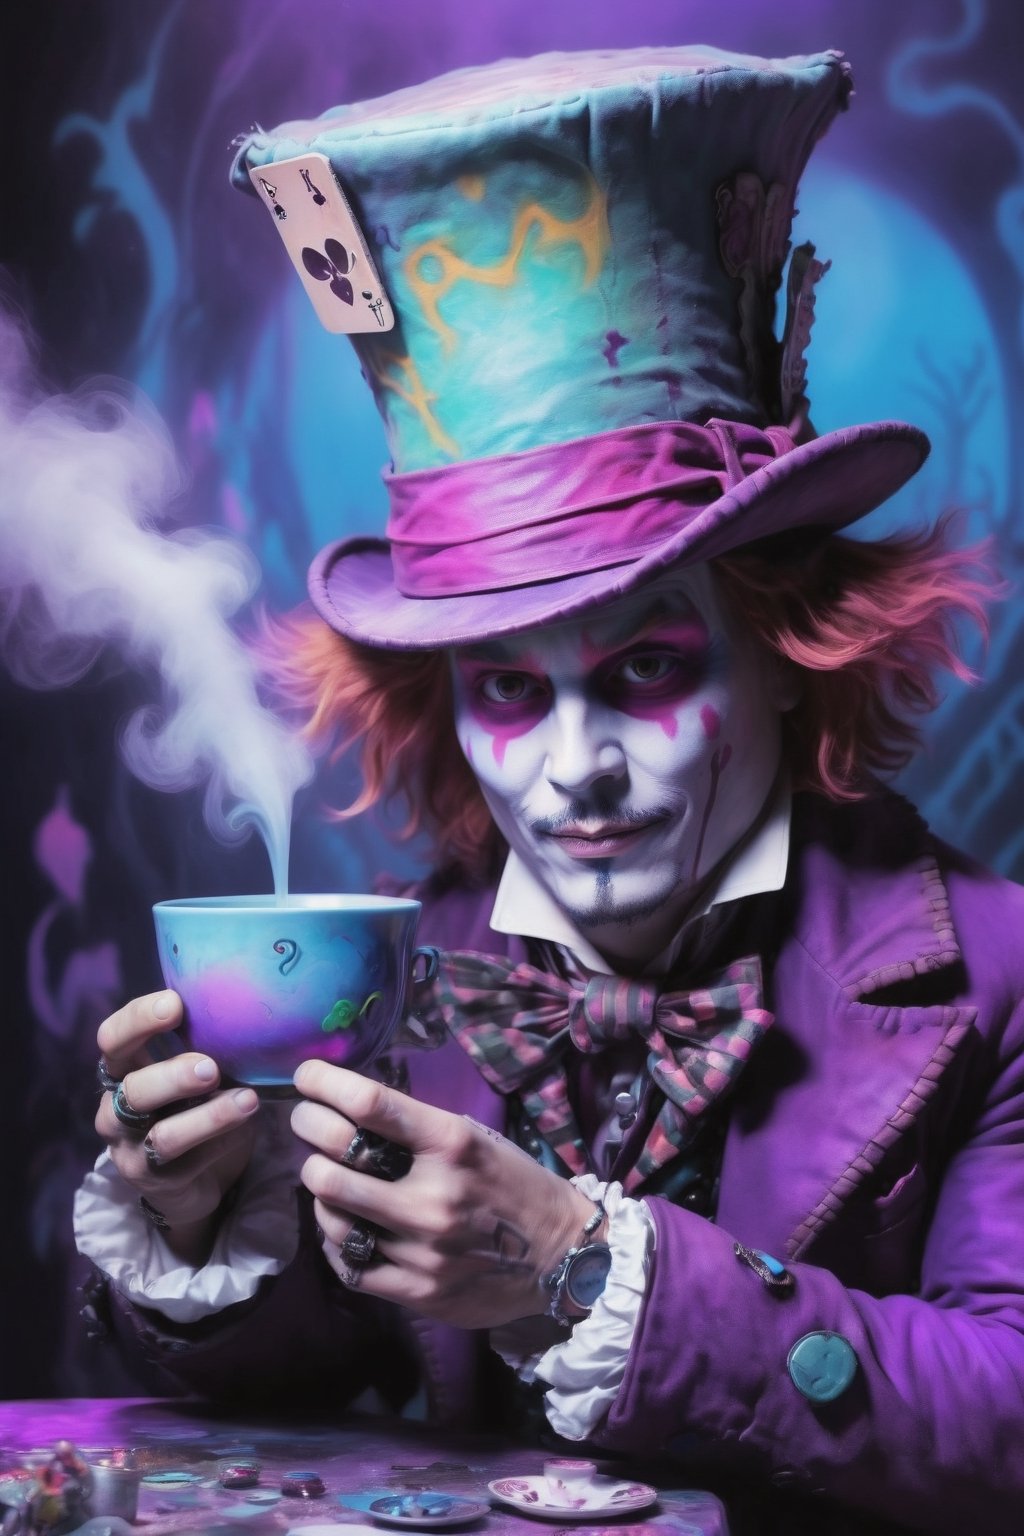 cyberpunk (mad hatter johnny depp in wonderland:1.3) holding a cup of tea,cyberpunk style,mysterious magical ground fog,bioluminiscent drink,graffito,mist,incredible detailed,soft neon light,cinematic,iridescent purple,vivid details,robotic bionic features,whimiscal toxic dust,hyperrealistic masterwork by head of prompt engineering 